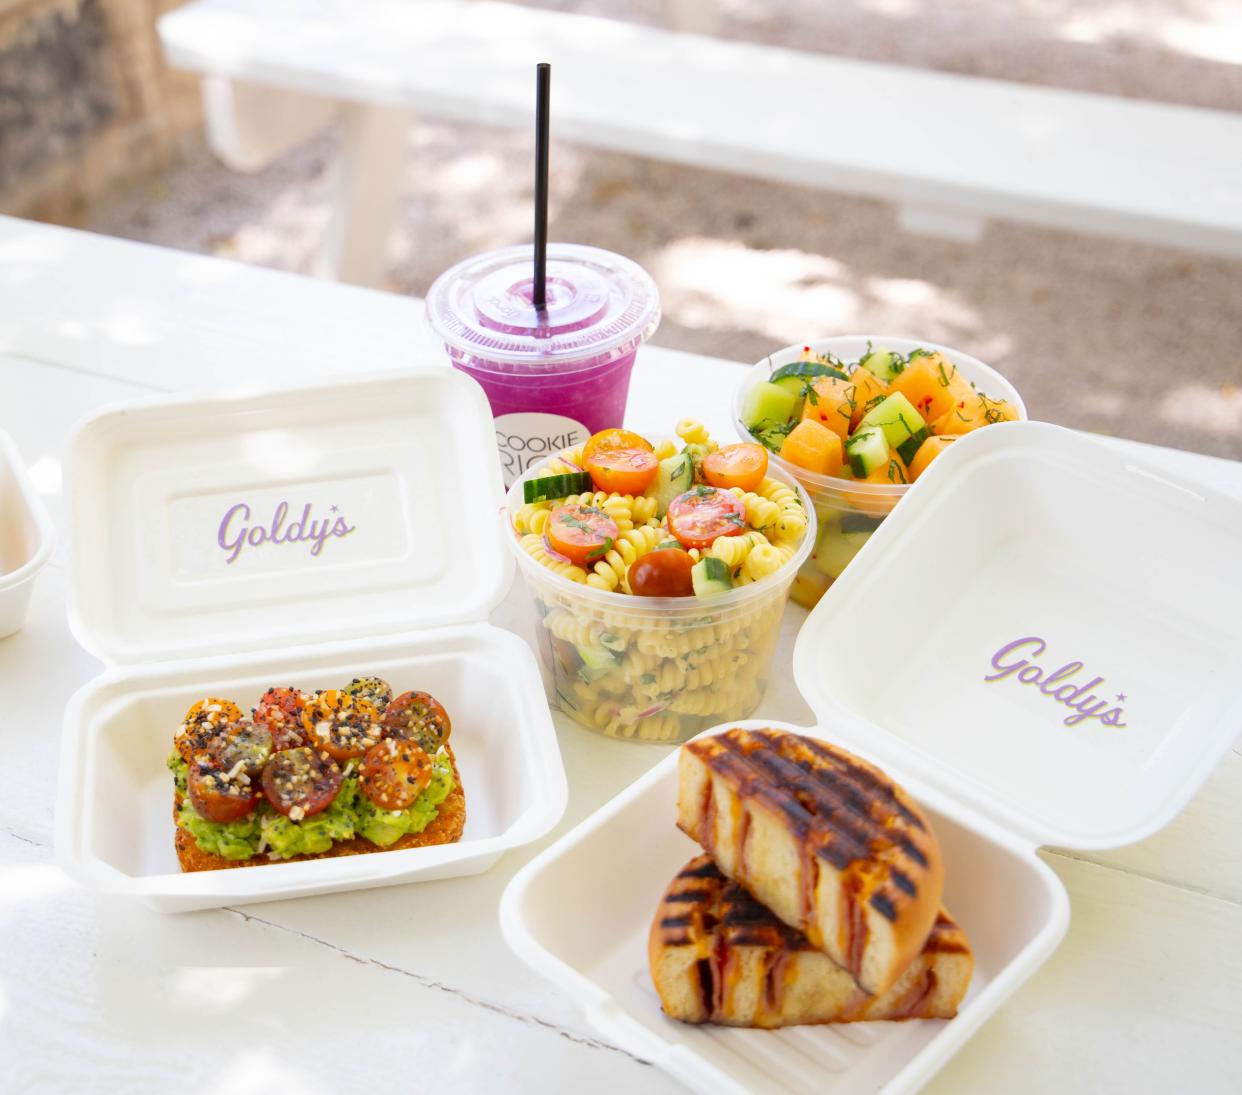 Chef Lorin Peters has opened Goldy's at Littlefield's in West Austin.